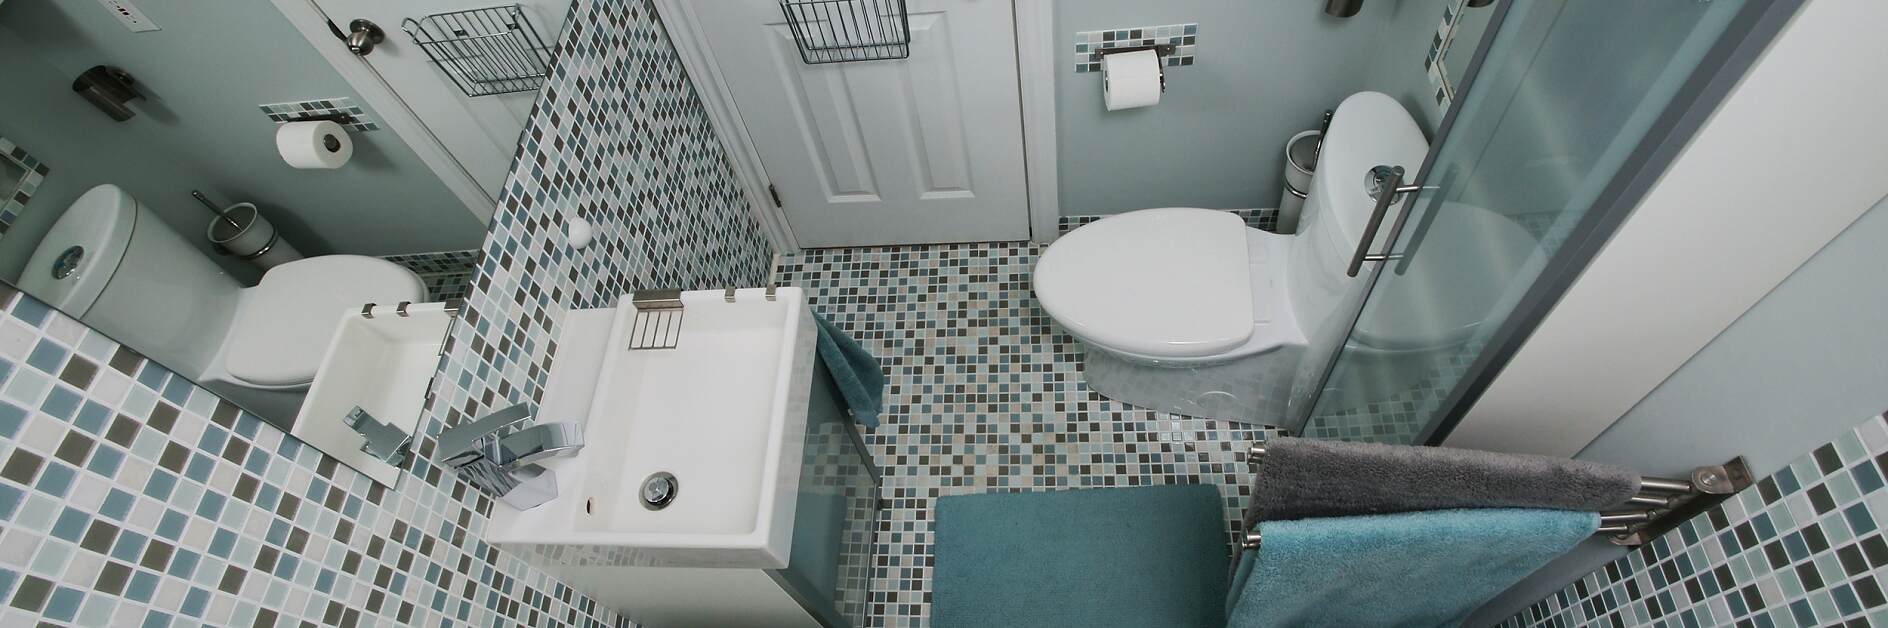 Smart Ideas for Small Bathrooms